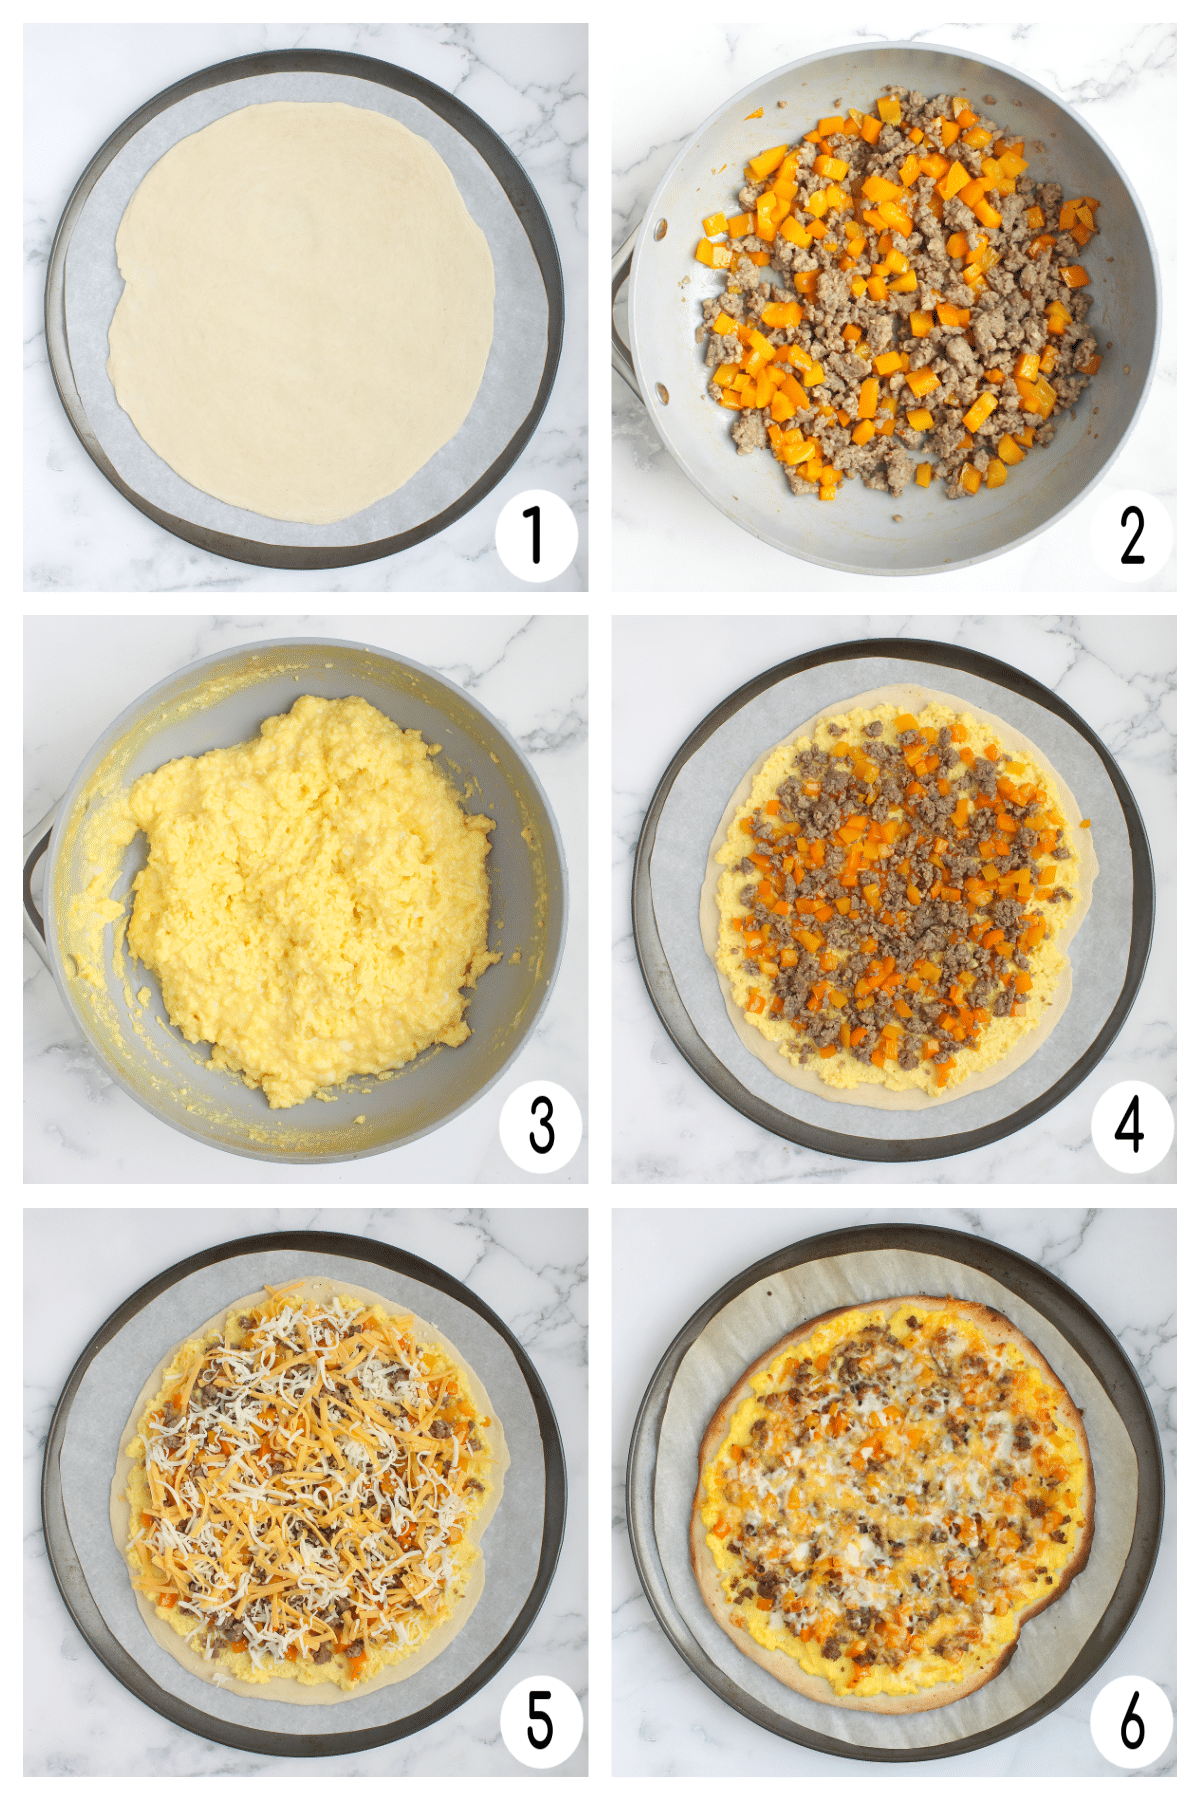 Process shots for how to make this breakfast pizza recipe.